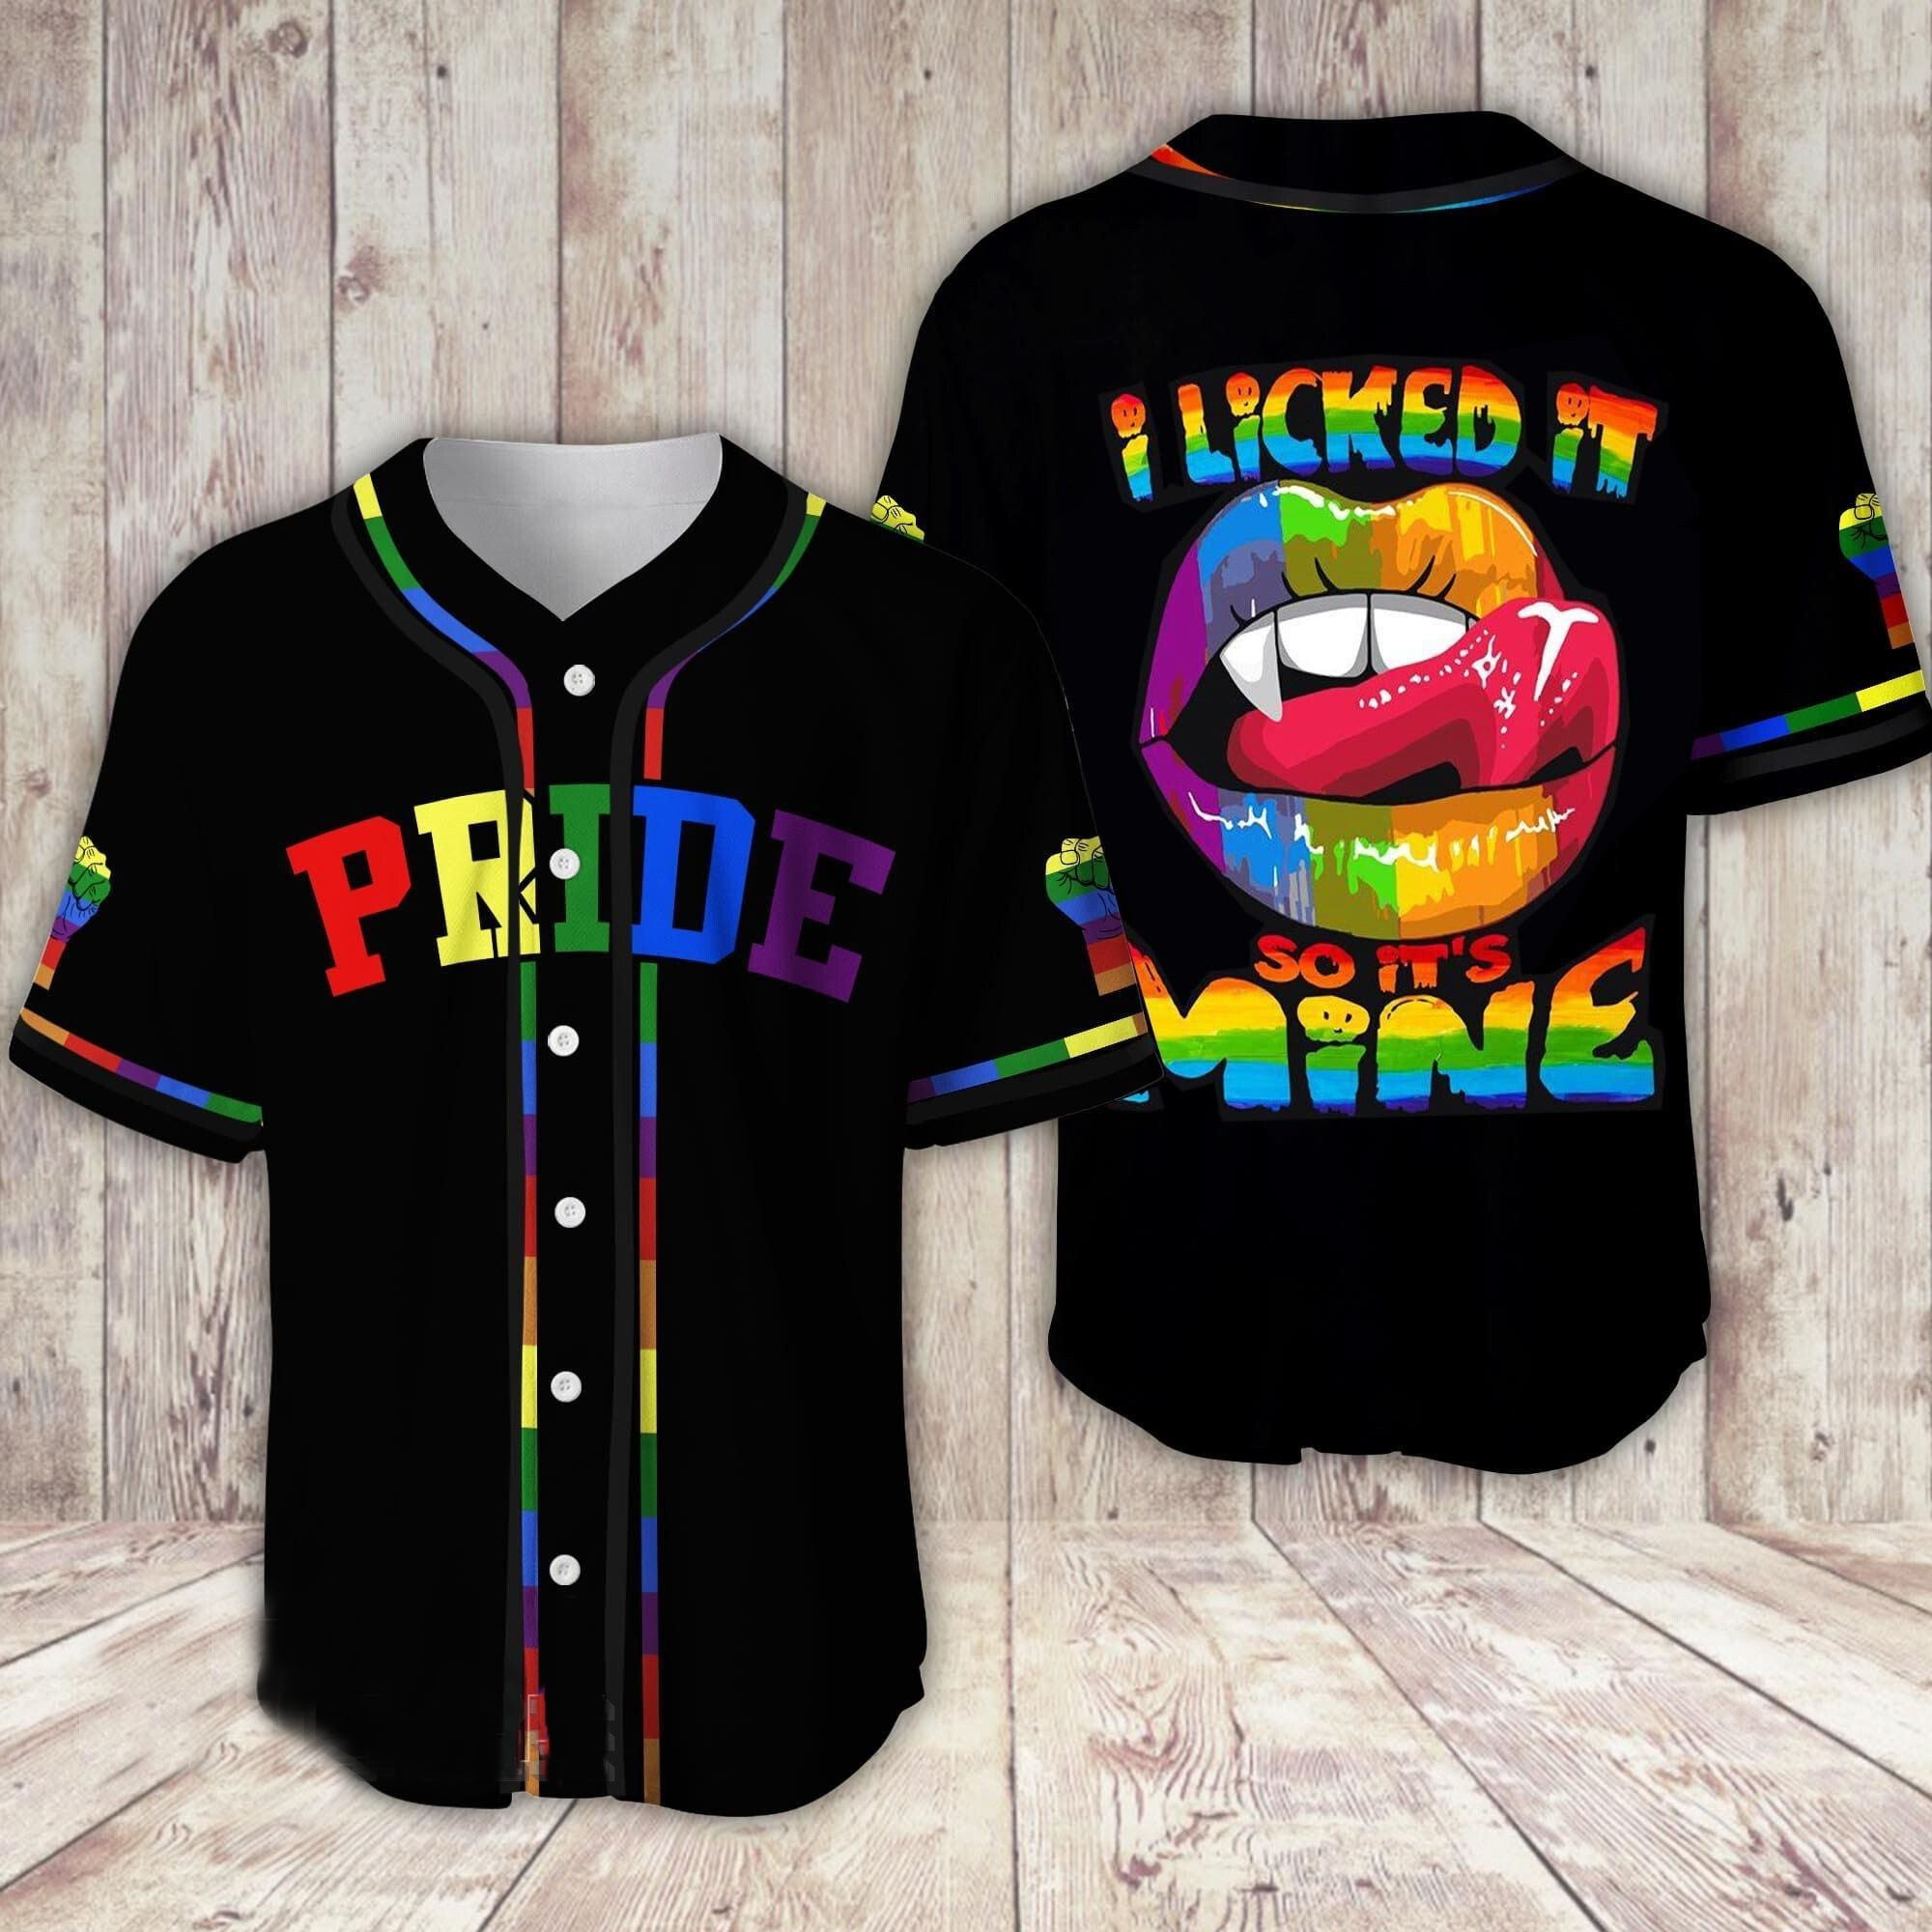 Lgbt Pride I Ever Made Was To Be Myself Baseball Jersey Shirt